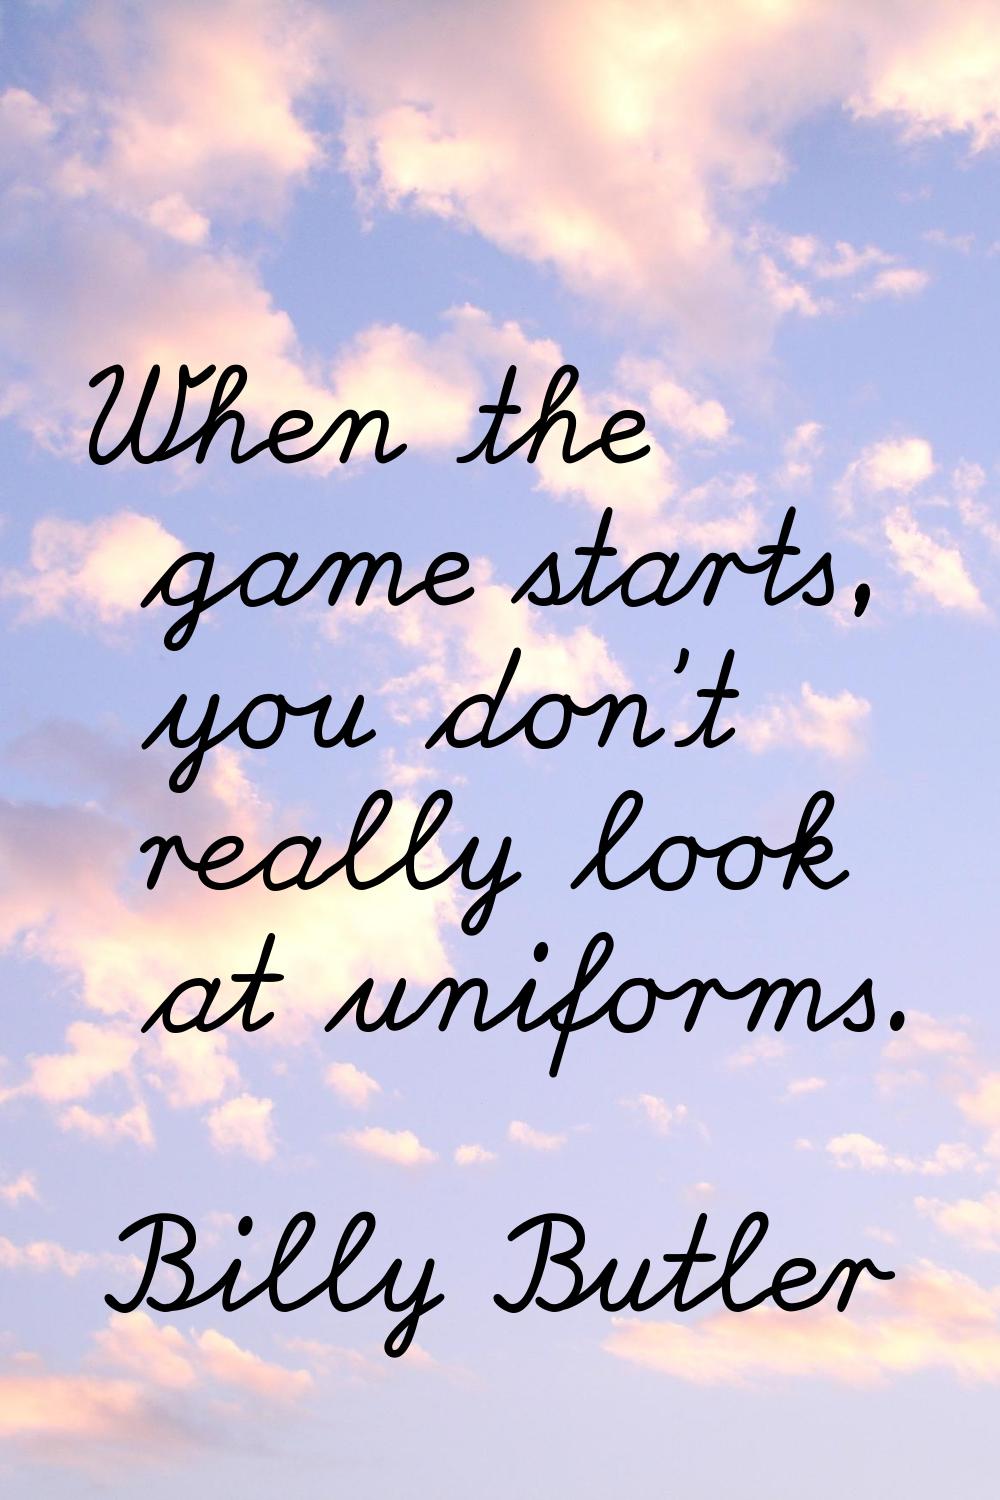 When the game starts, you don't really look at uniforms.